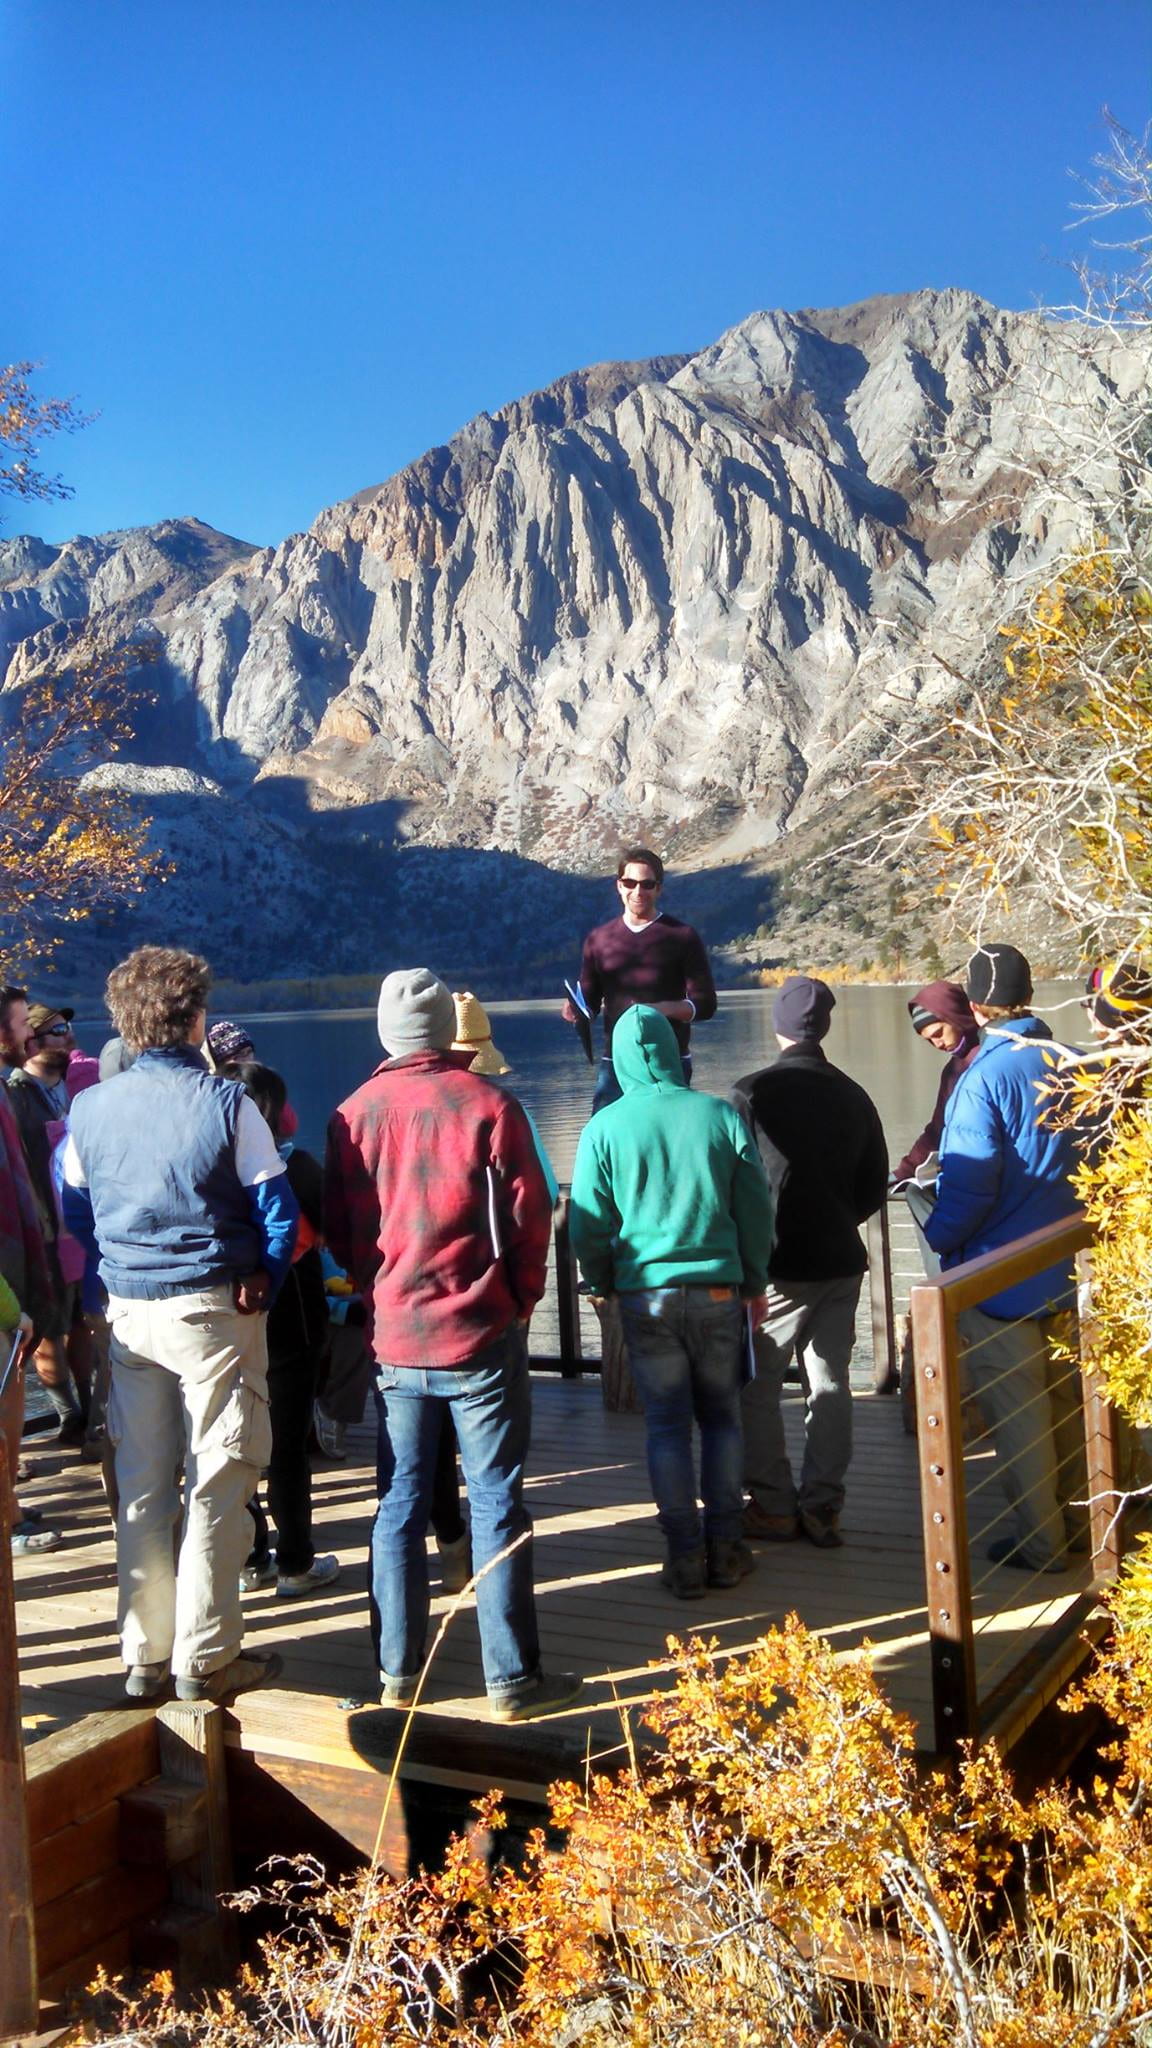 Now for my PhD, here I am presenting for a field course at Caltech on glacial moraines at Convict Lake